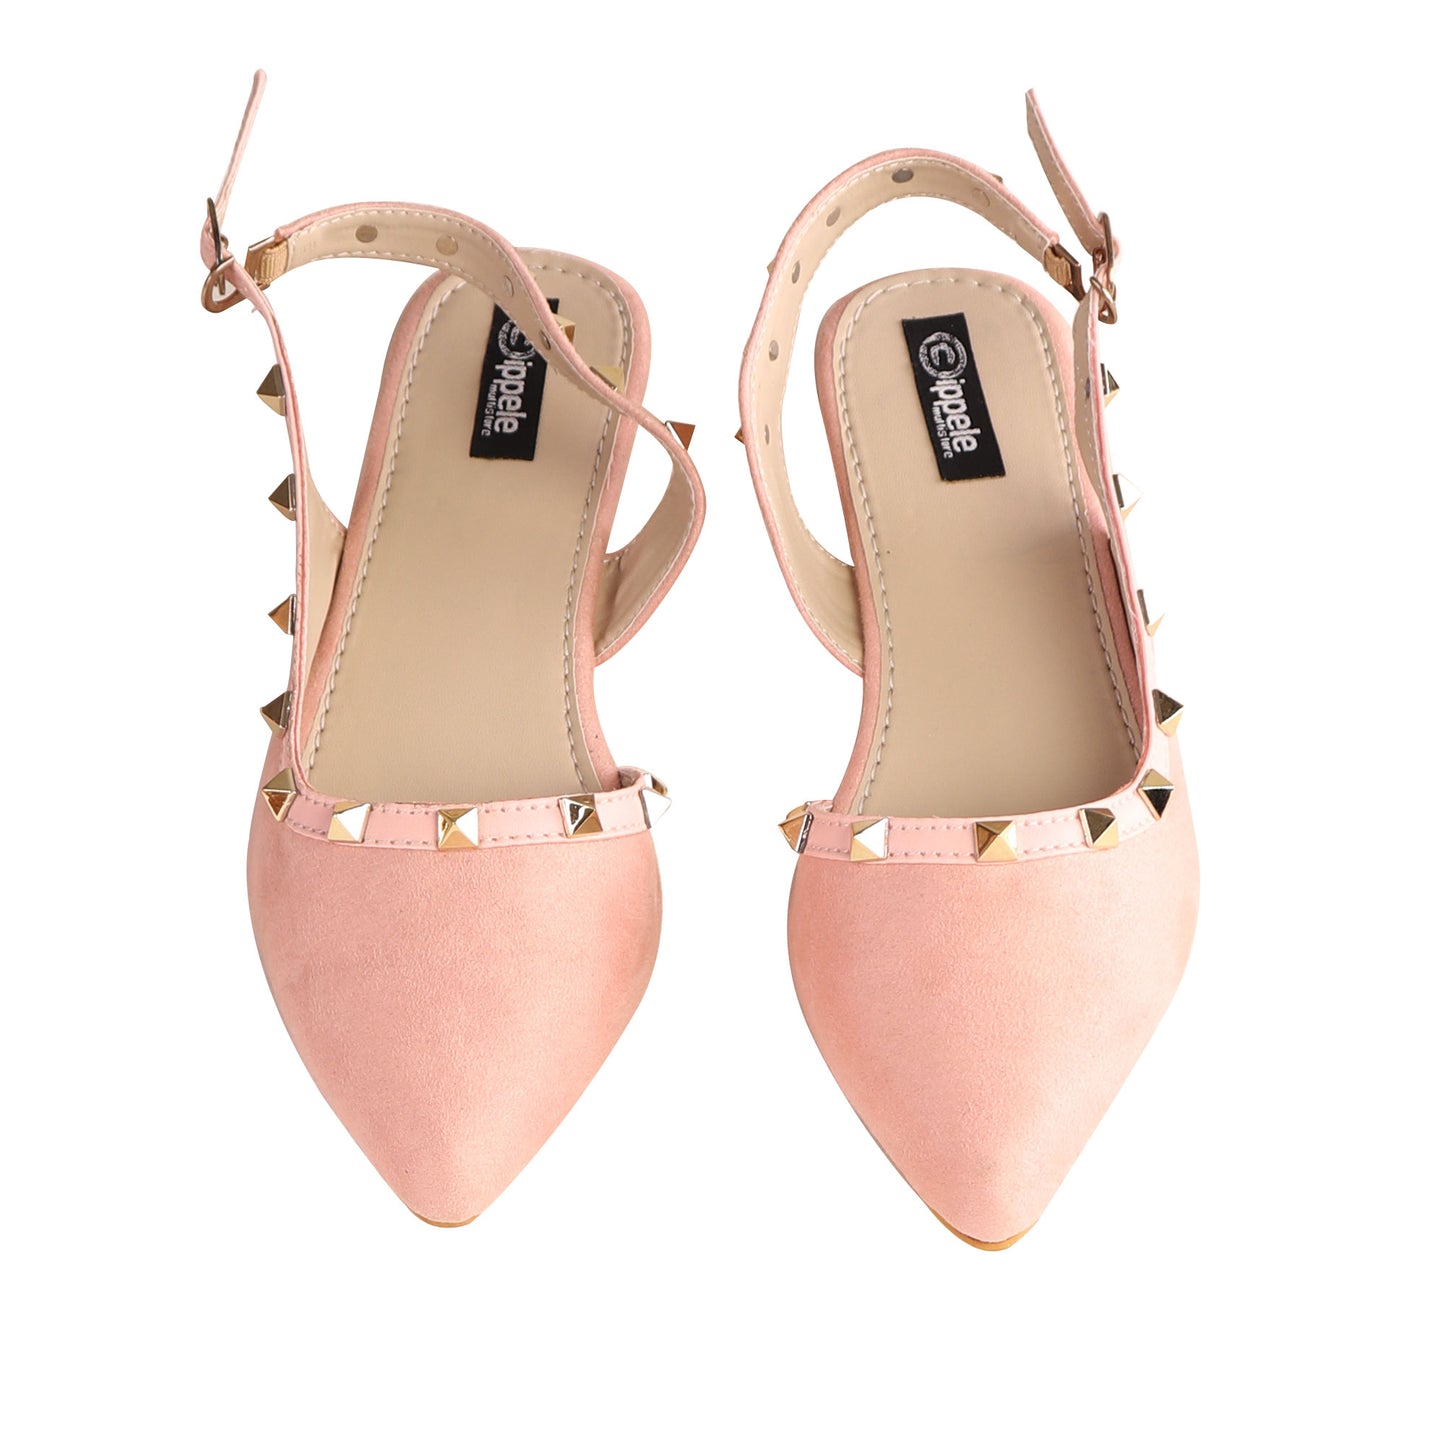 Foot Wear,The Glitters on Trotters Valentino in Baby Pink - Cippele Multi Store